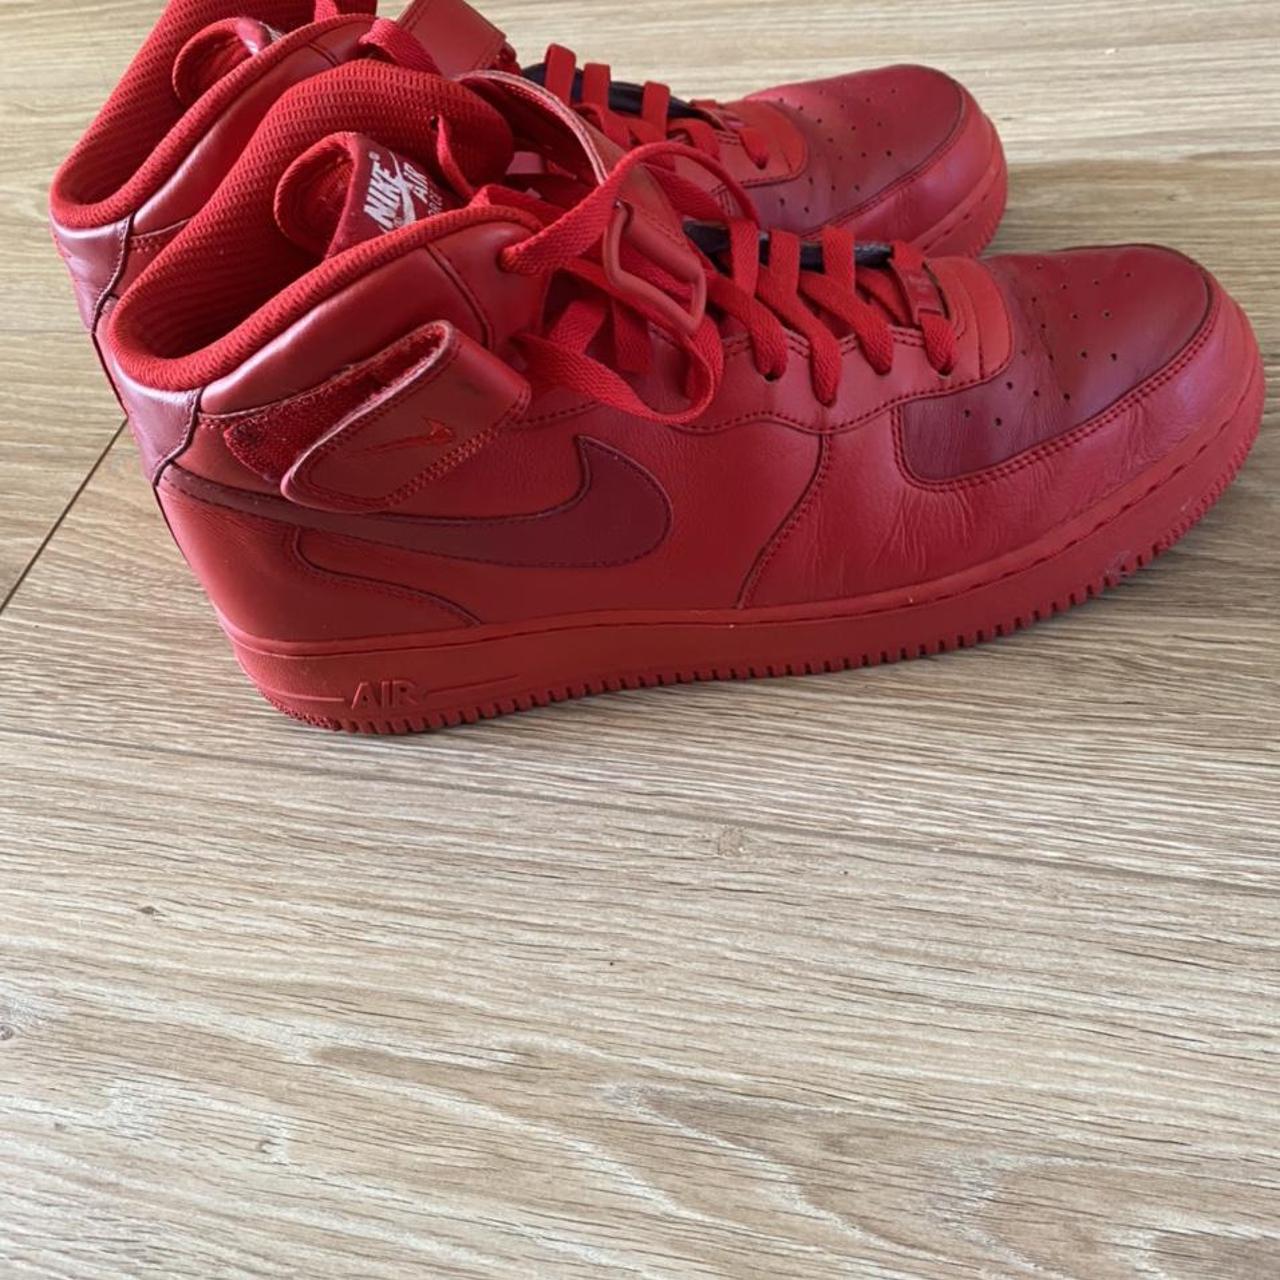 Nike Airforce 1: red. Very good condition, I just... - Depop